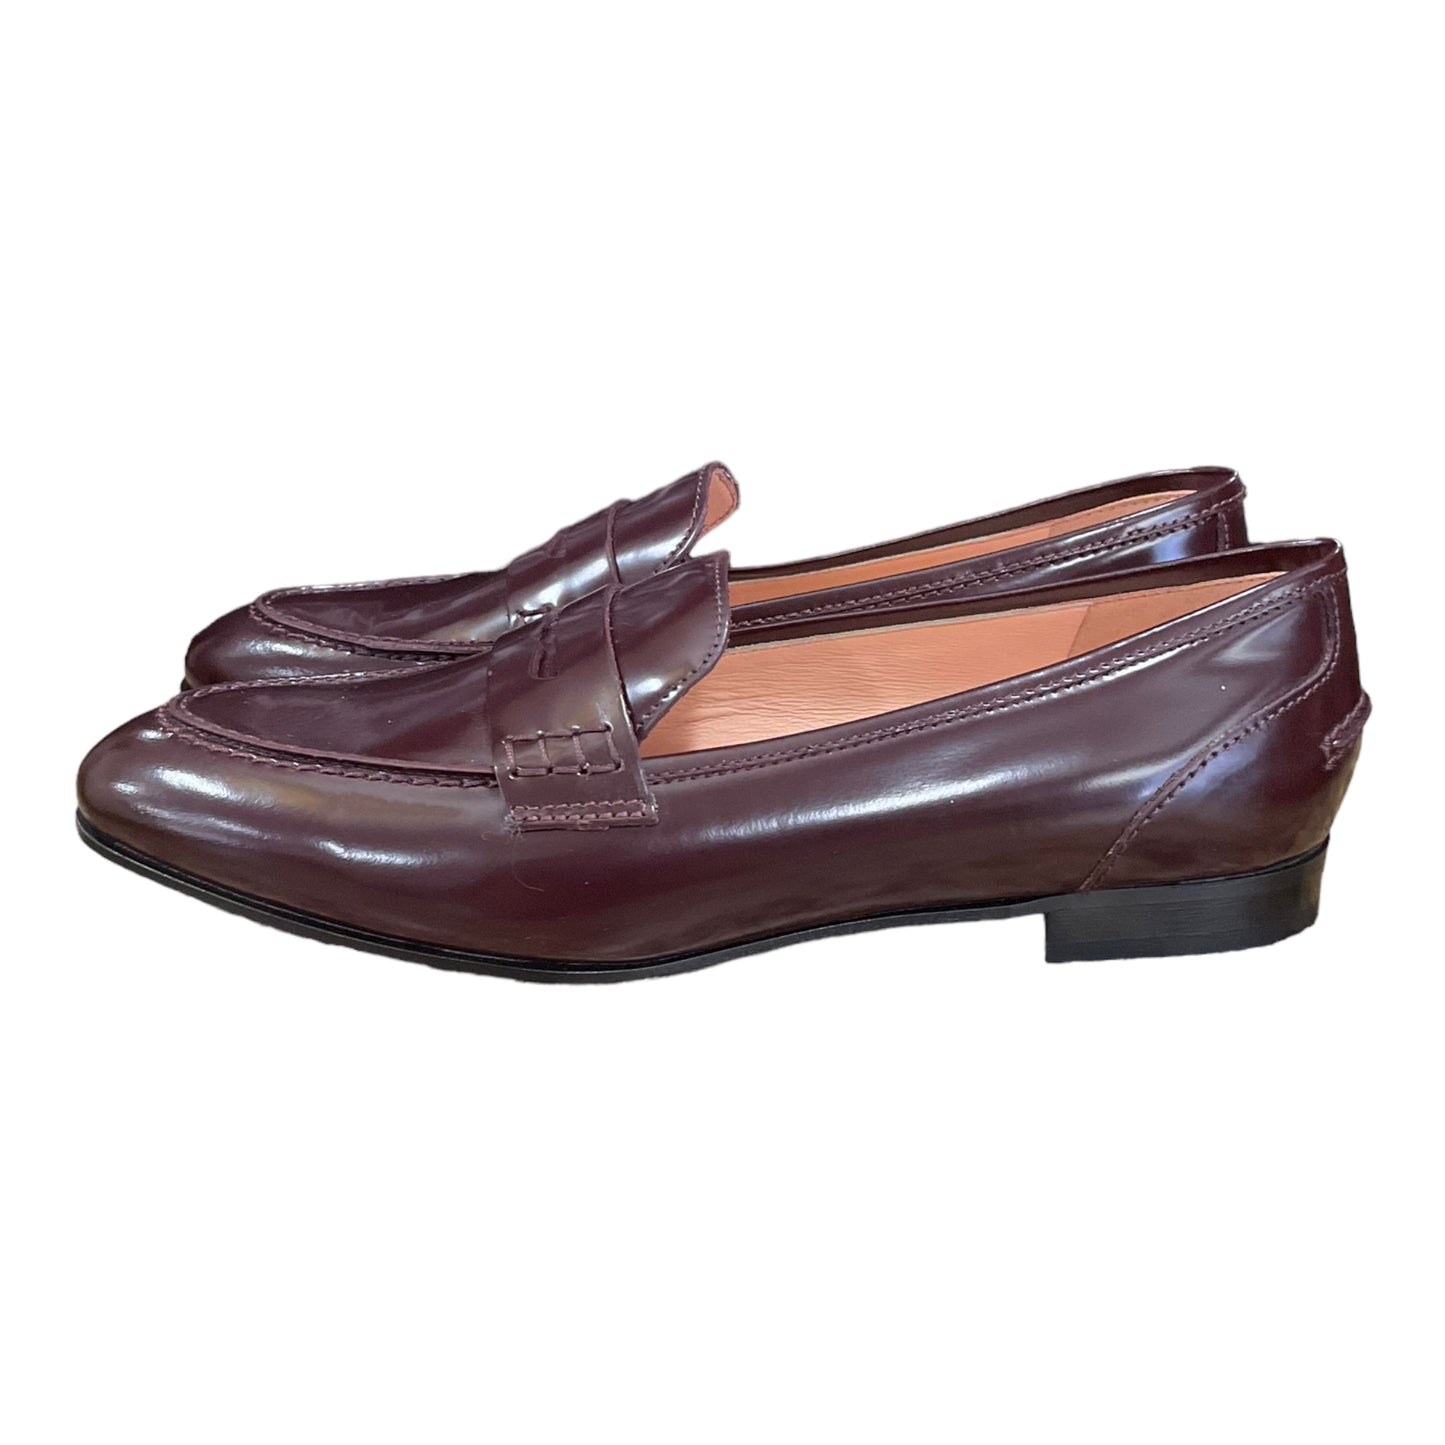 Shoes Flats Loafer Oxford By J Crew  Size: 8